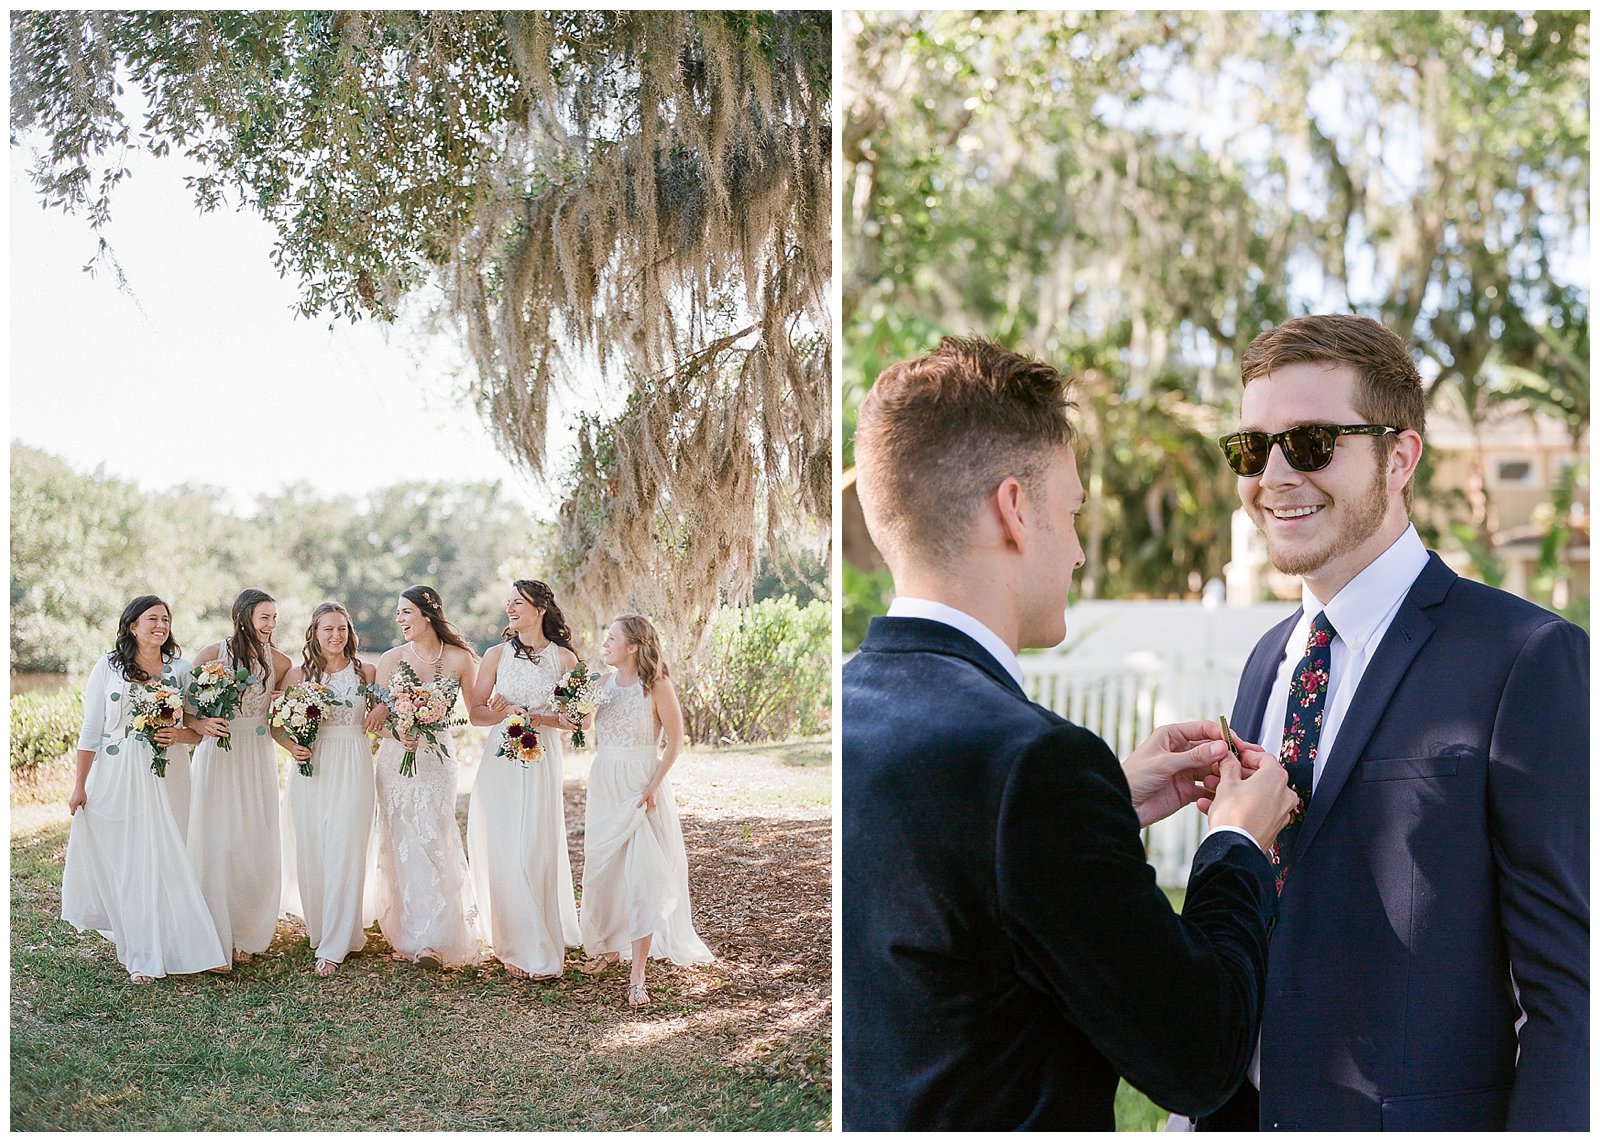 Emilie & Cole: A Backyard Wedding in St. Pete, Florida - The Ganeys ...